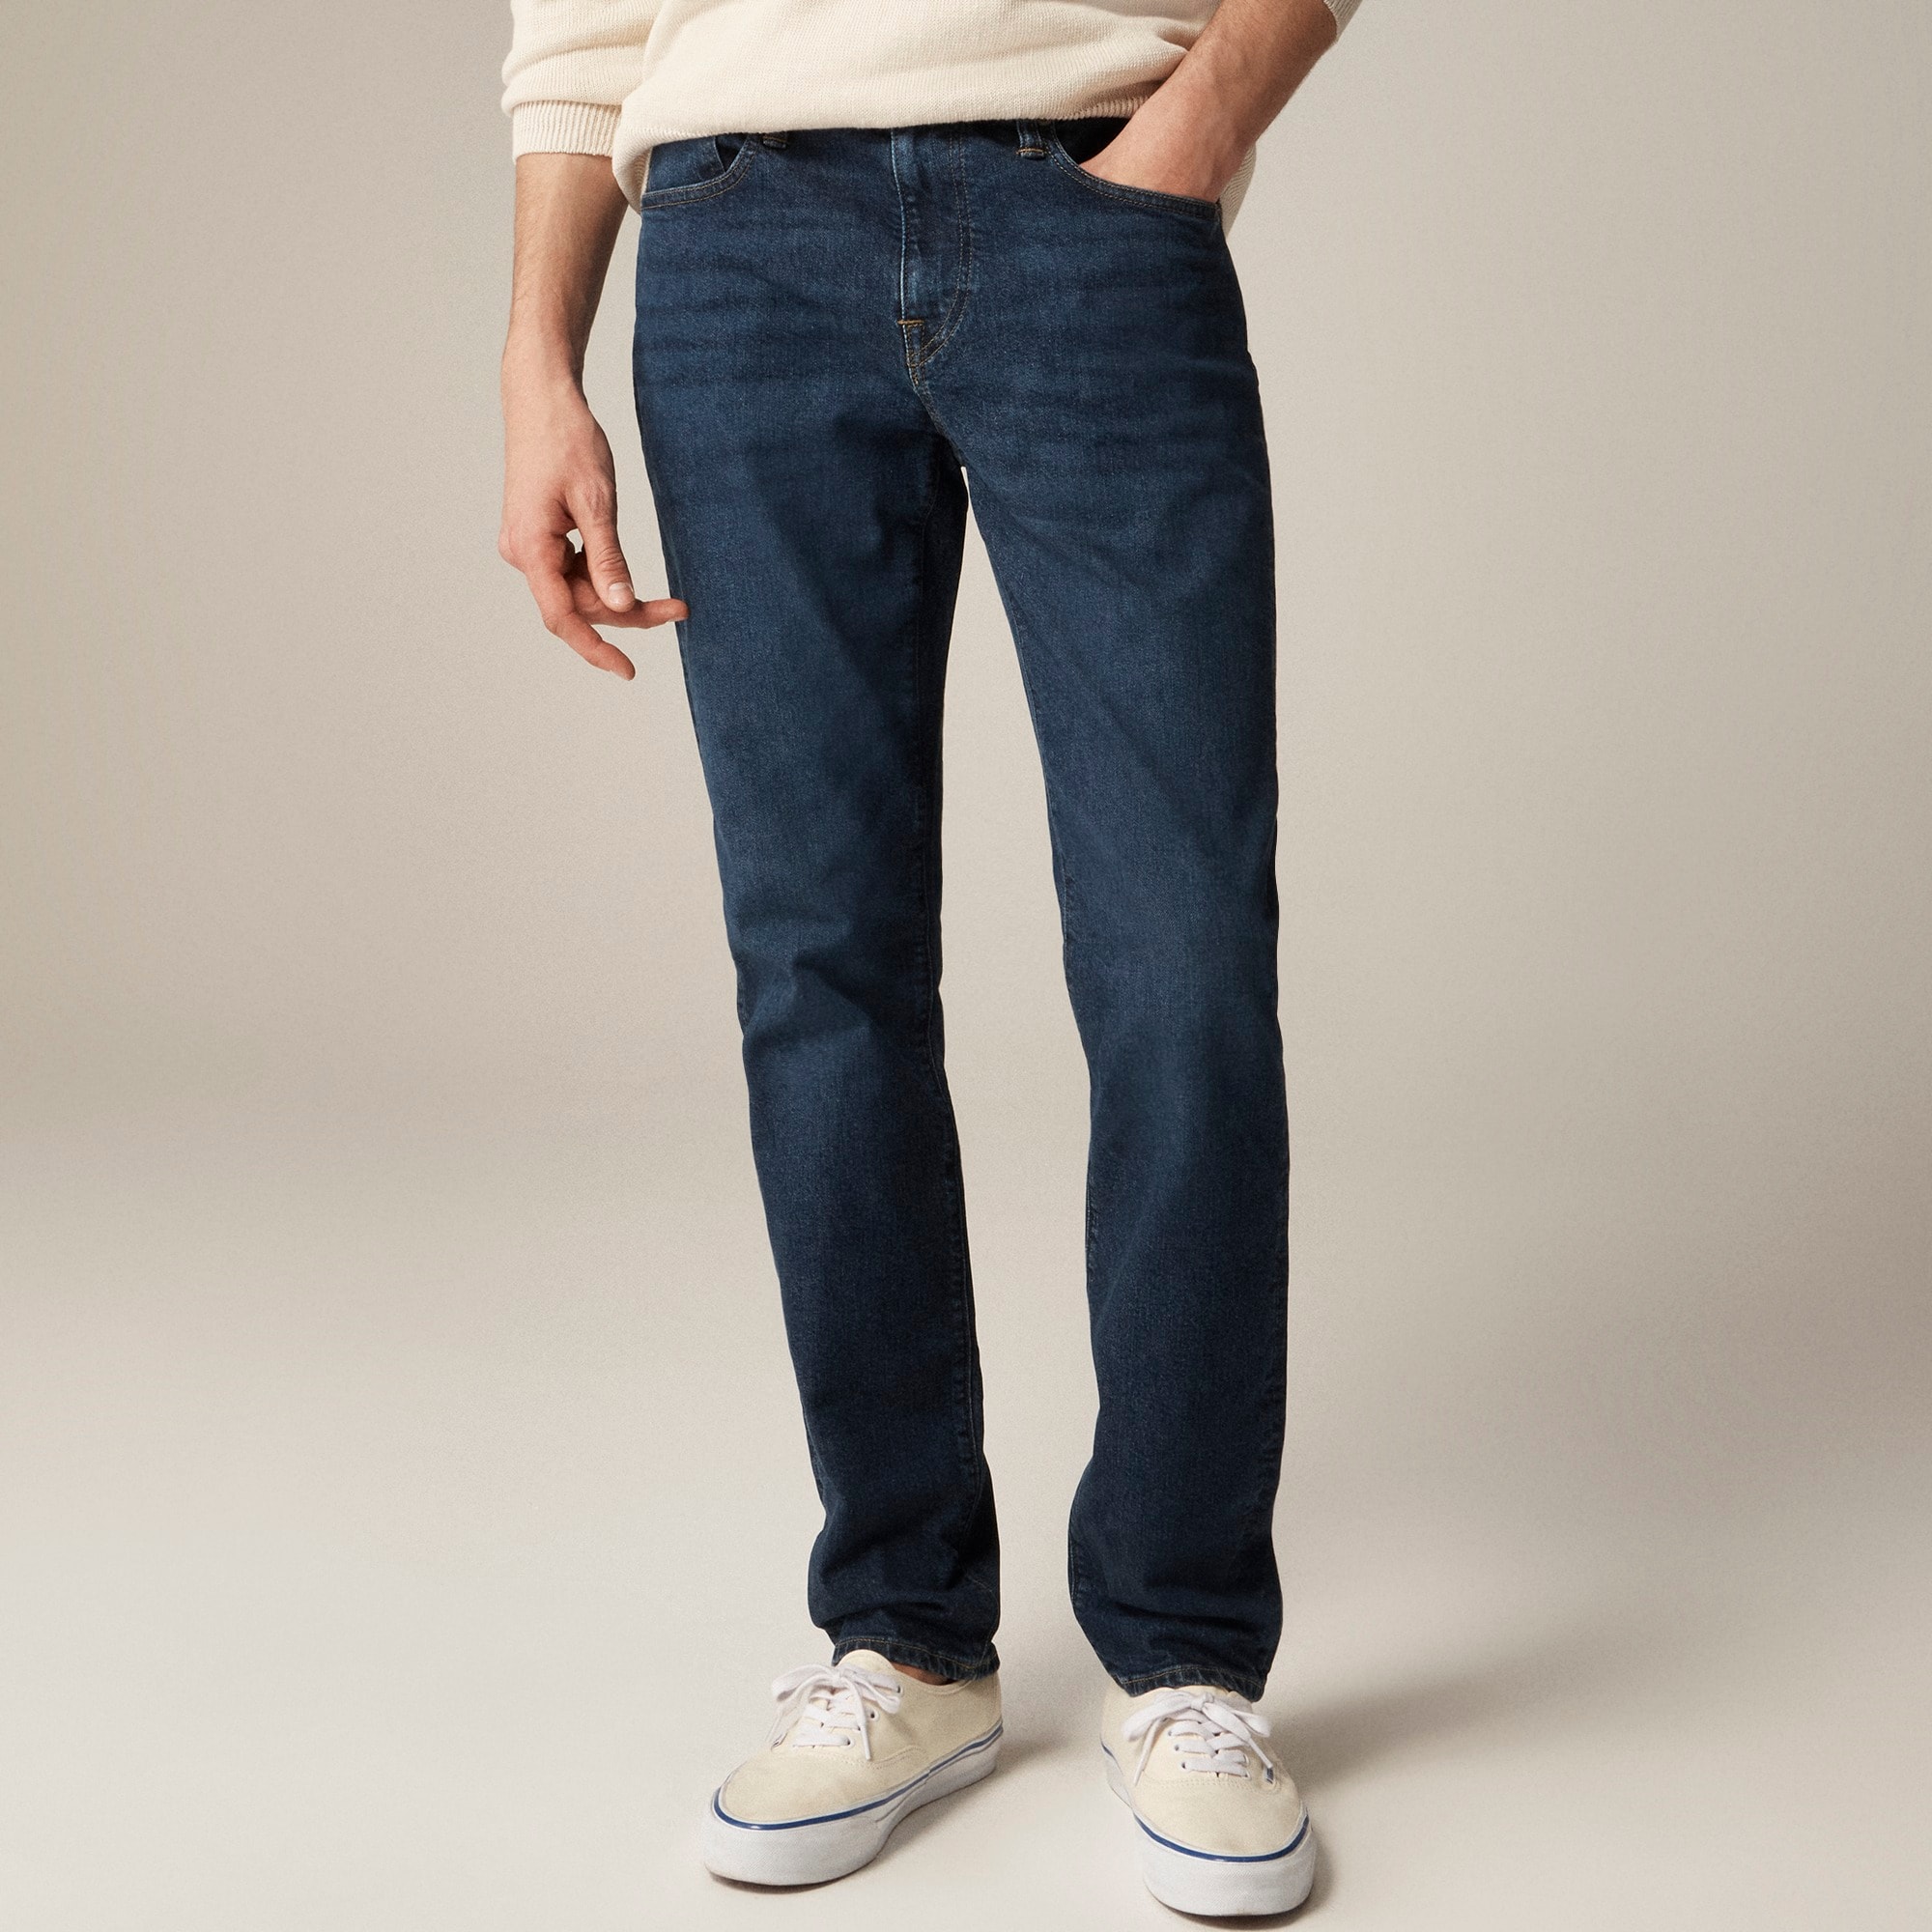 j.crew: 484 slim-fit stretch jean in one-year wash for men